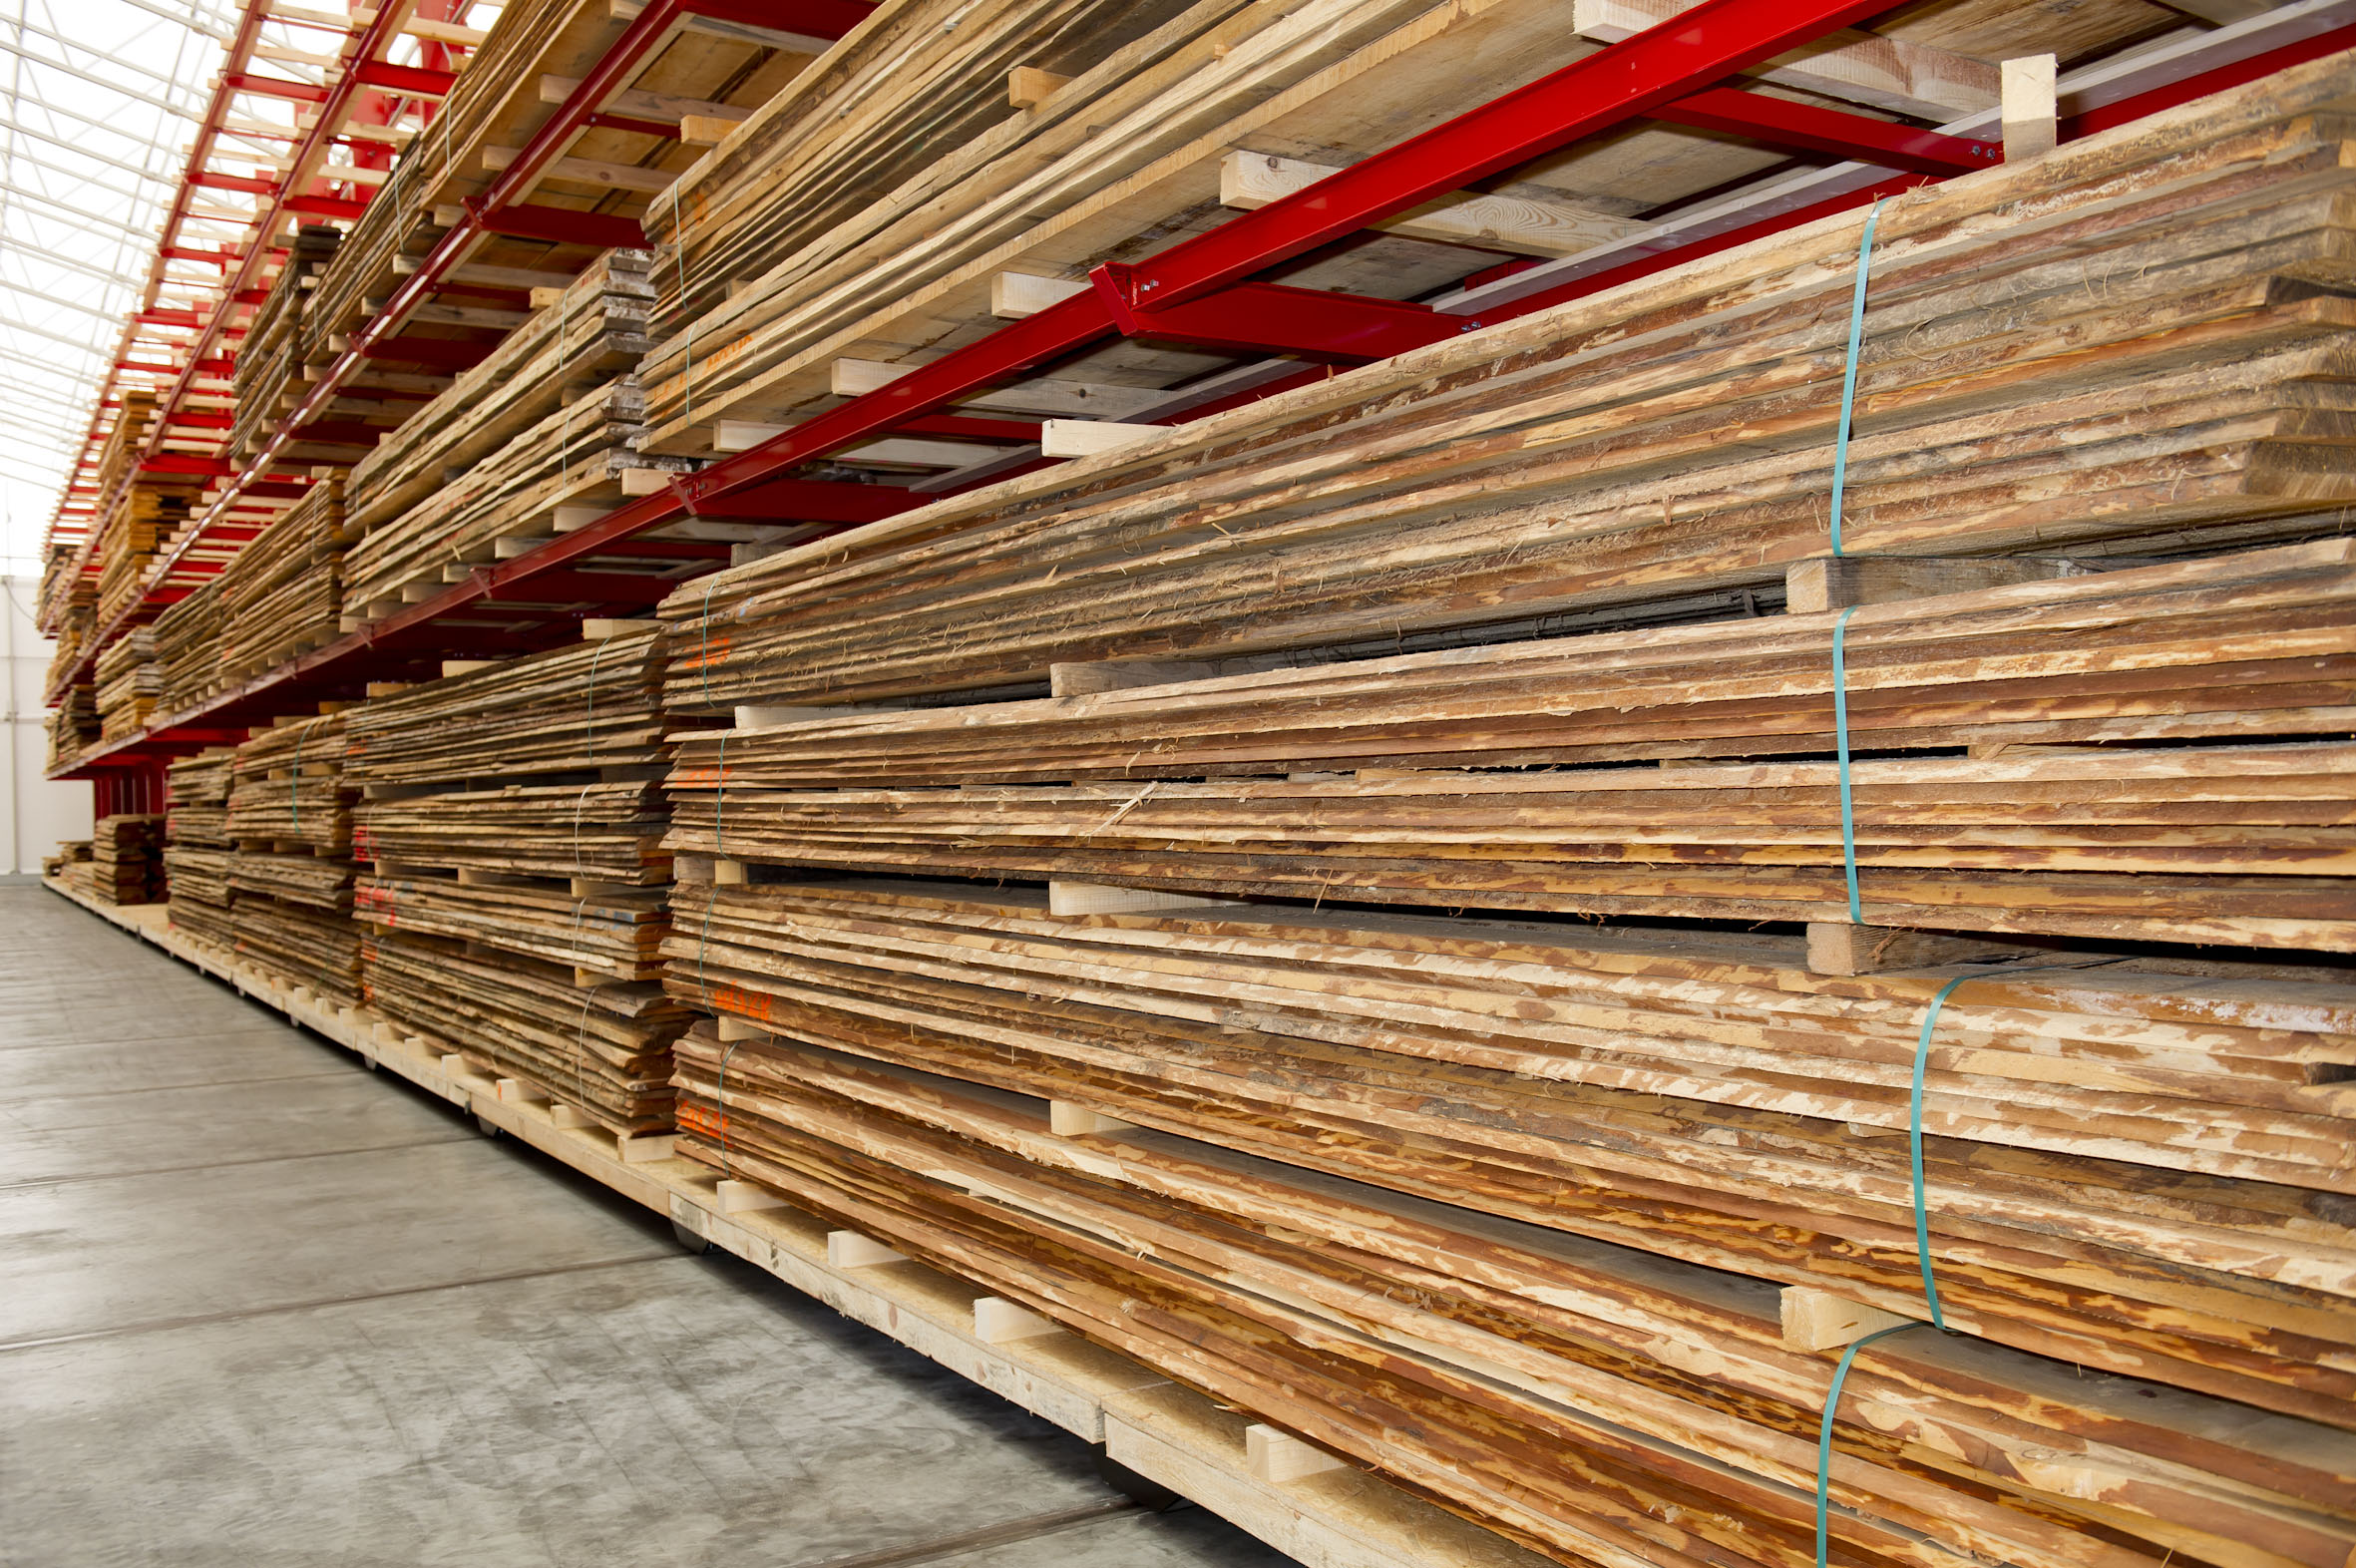 [Translate "Italien"] Cantilever racking timber trade